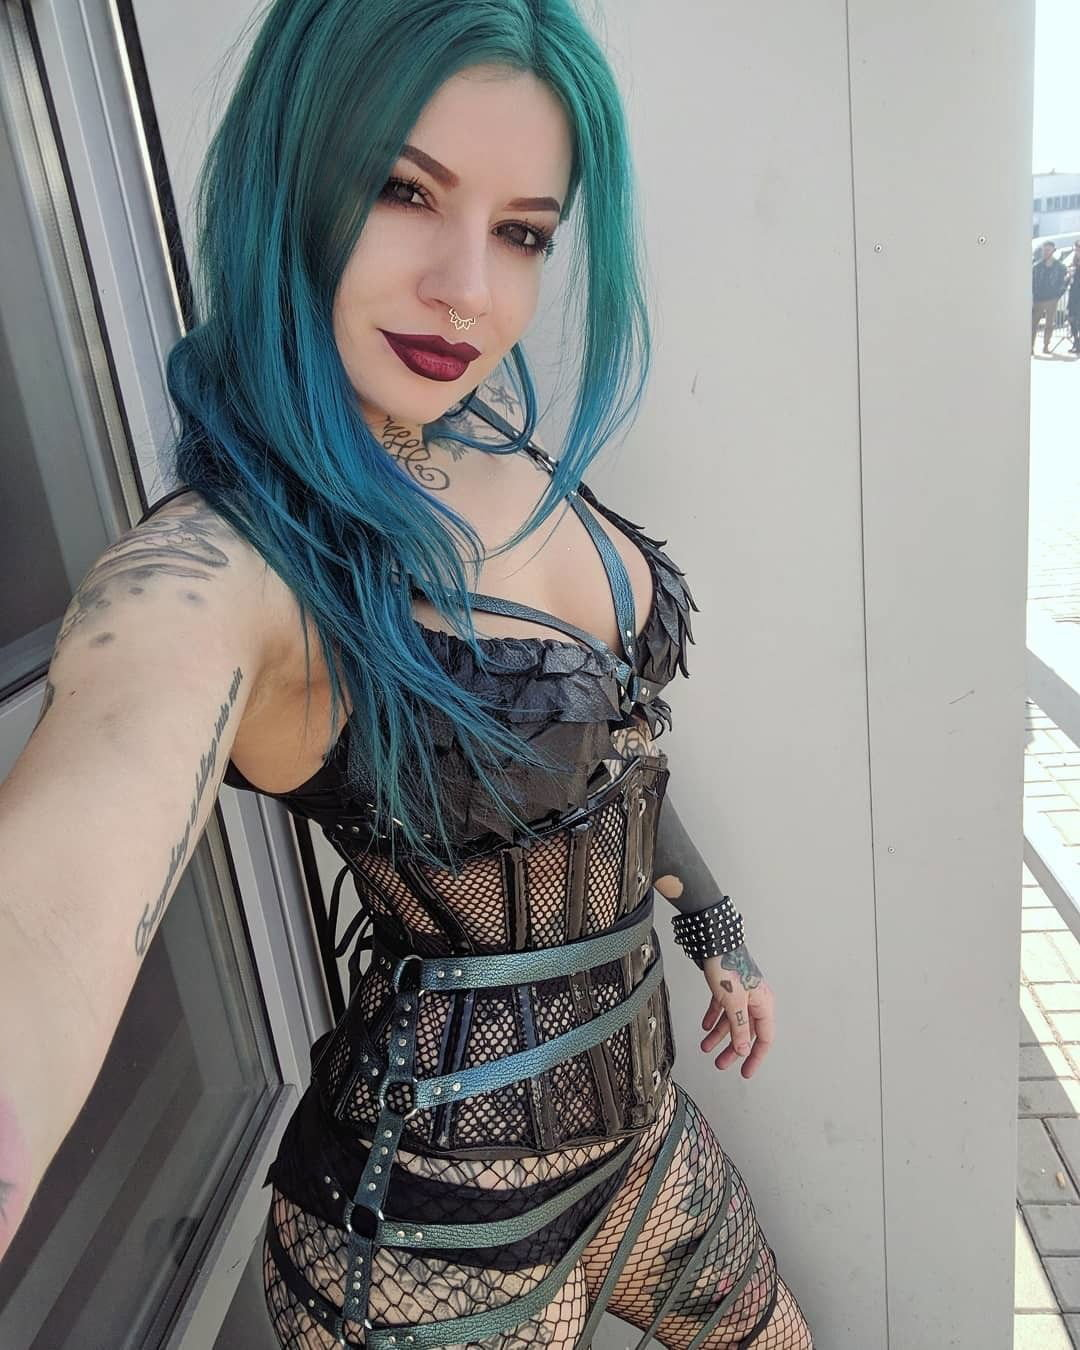 Photo by Devynsdogg with the username @Devynsdogg,  April 6, 2019 at 9:37 PM and the text says 'Usually these girls don't come out in the sunlight. #bdsm #bdsmfemdomgirl #sexylingerie #tattoo #babes #sexyfemales #beautifulgirls #neonhair..'